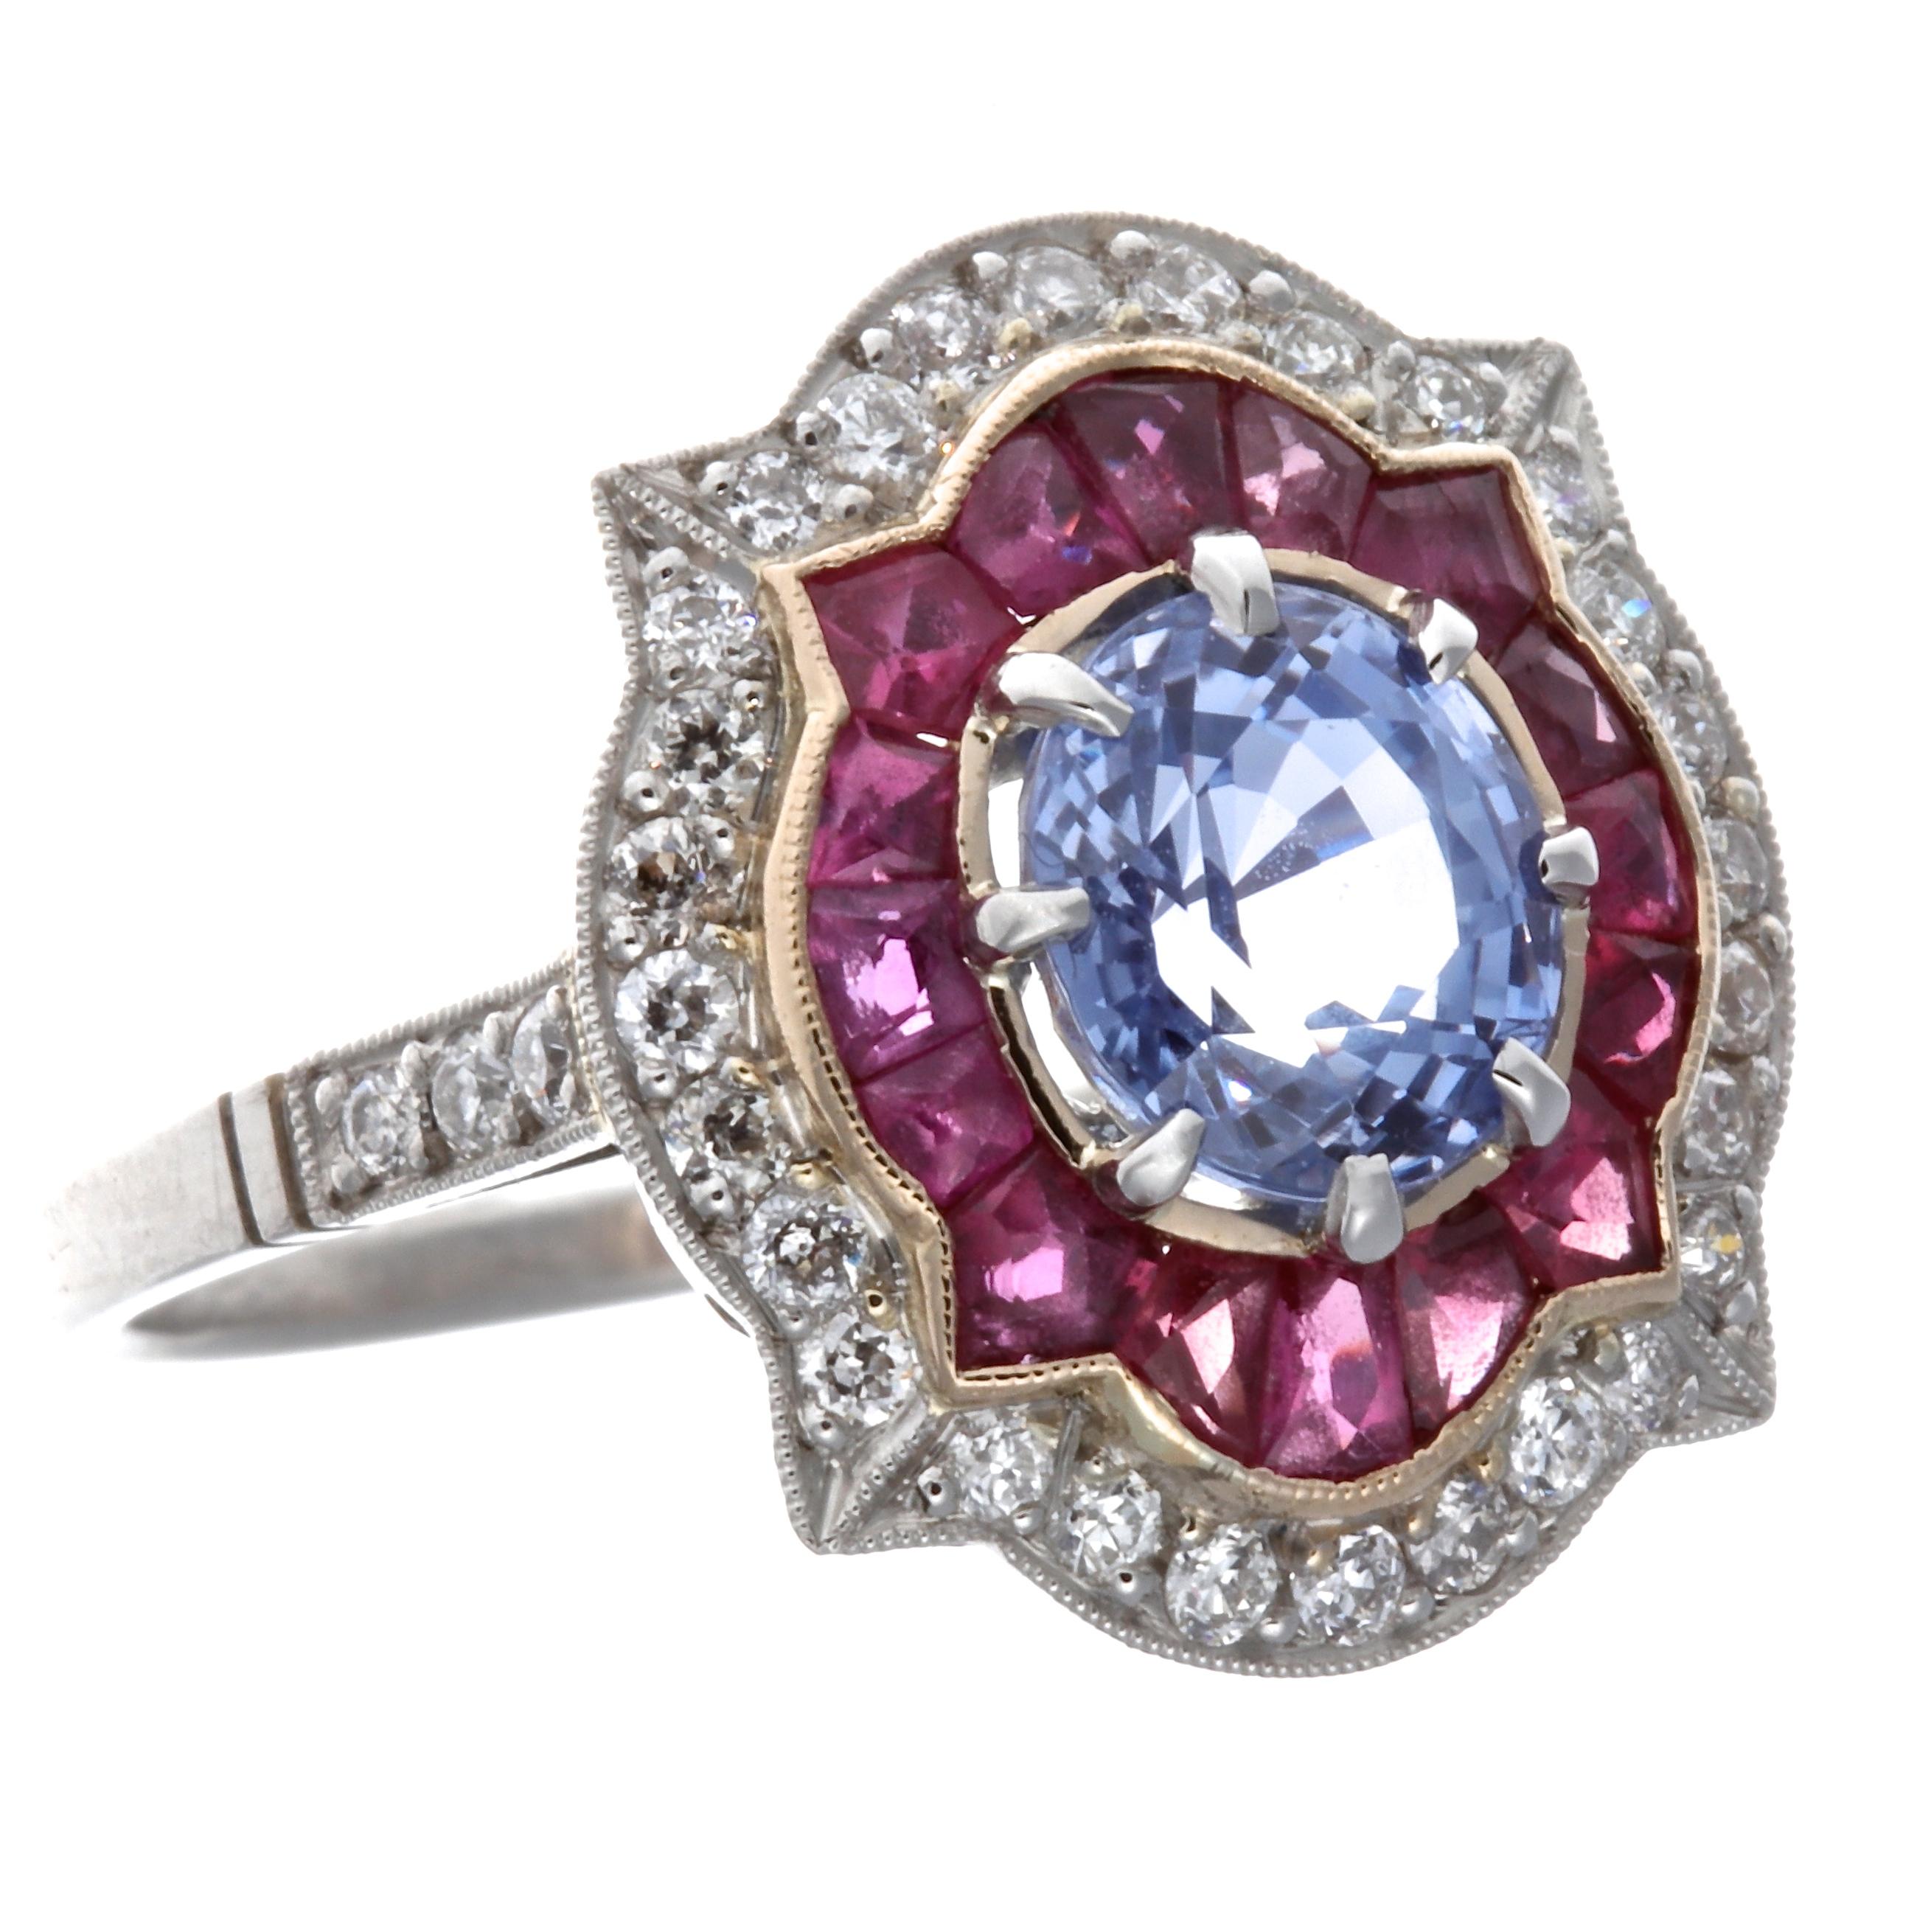 If you are graceful, fun, charming, and cultivated, this ring is a perfect reflection of your personality. The rubies, sapphires, and diamonds, all shaped differently and placed in a unique setting truly represent someone who has a lot to offer.